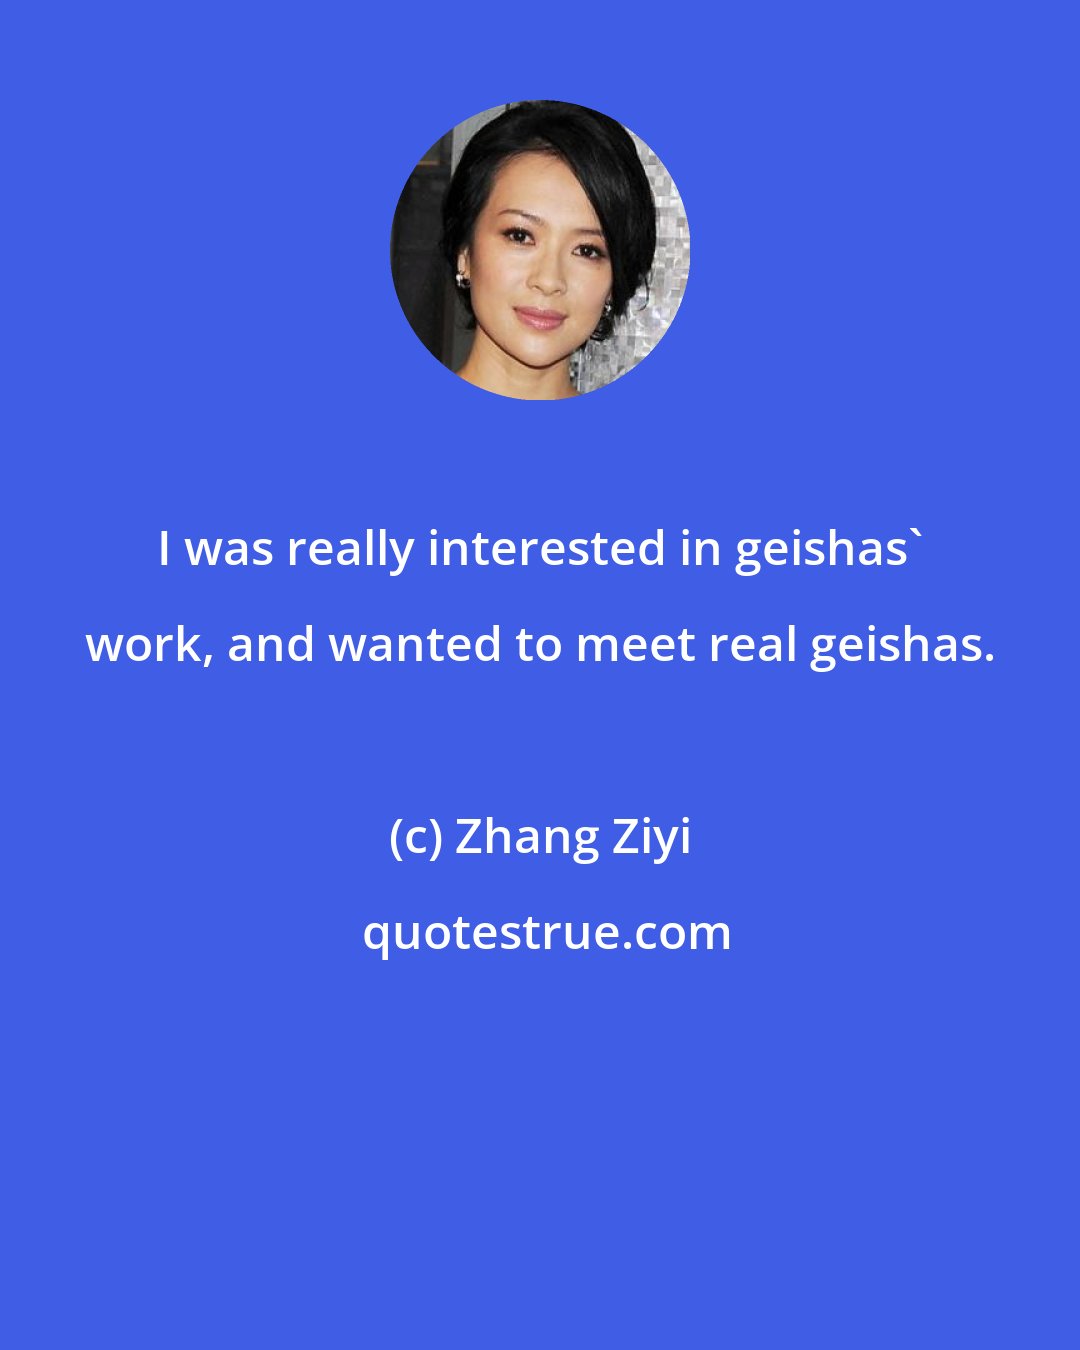 Zhang Ziyi: I was really interested in geishas' work, and wanted to meet real geishas.